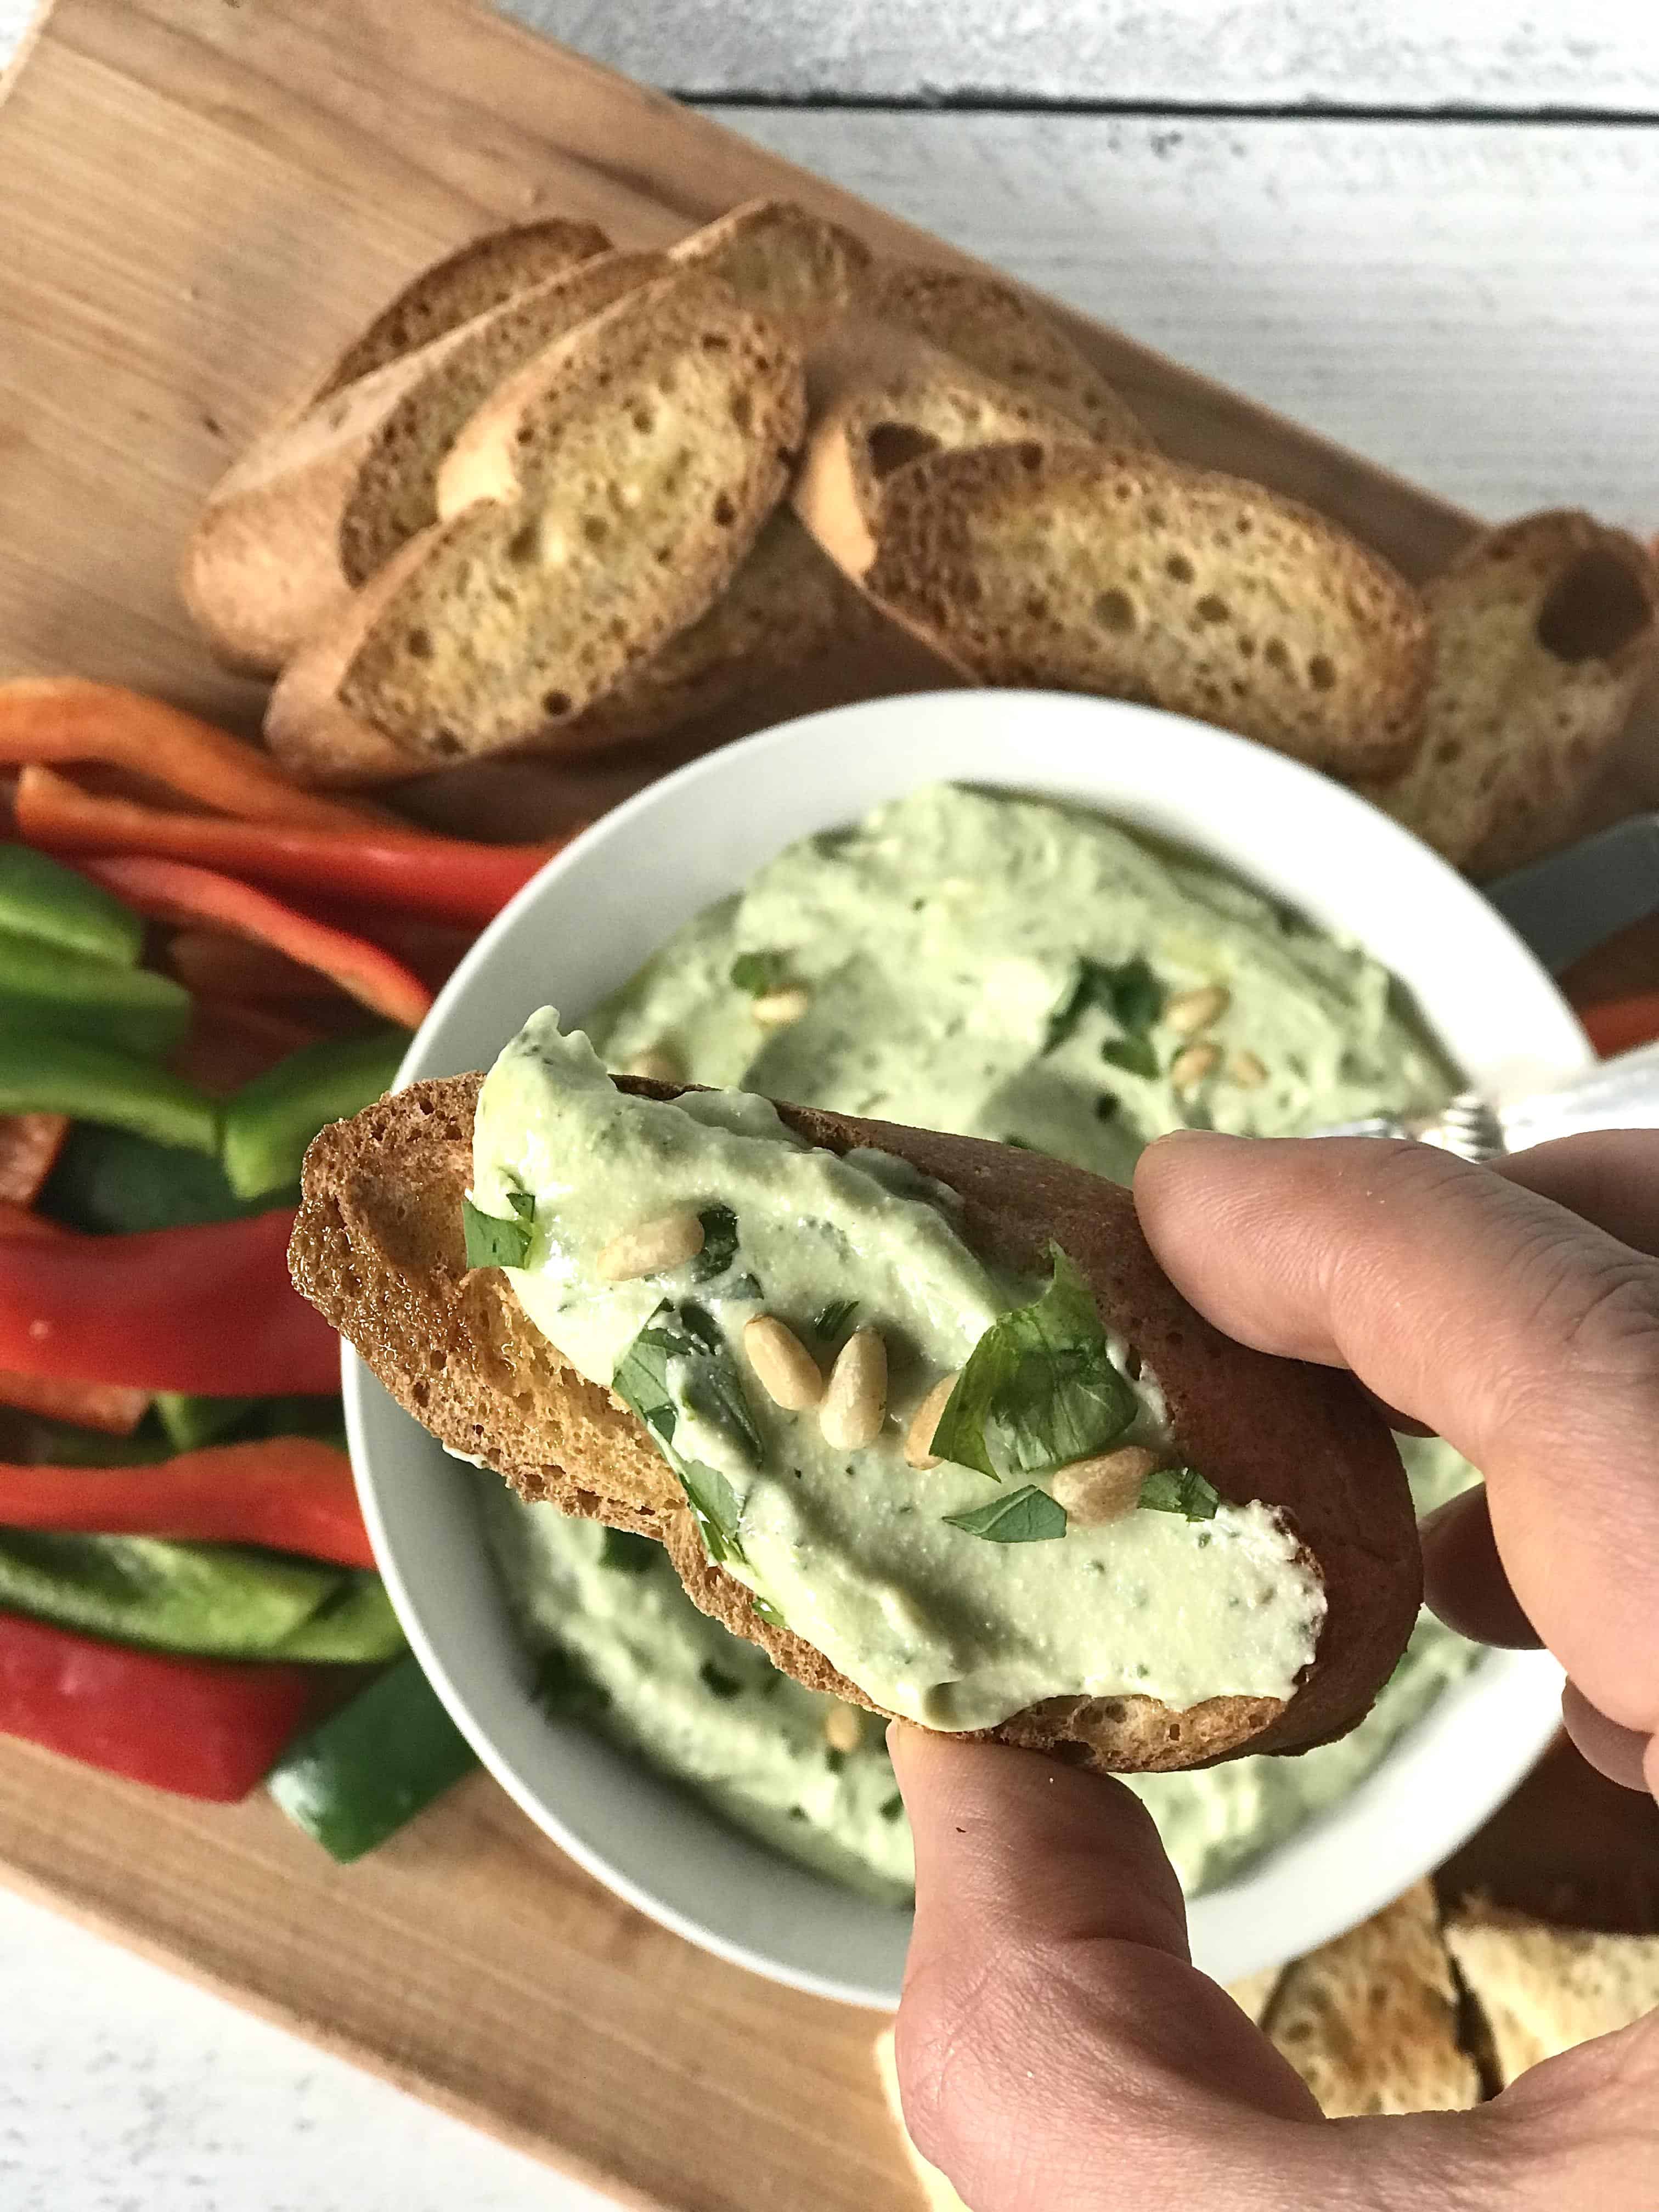 a creamy herb dip spread on a toasted baguette slice being held up by a hand